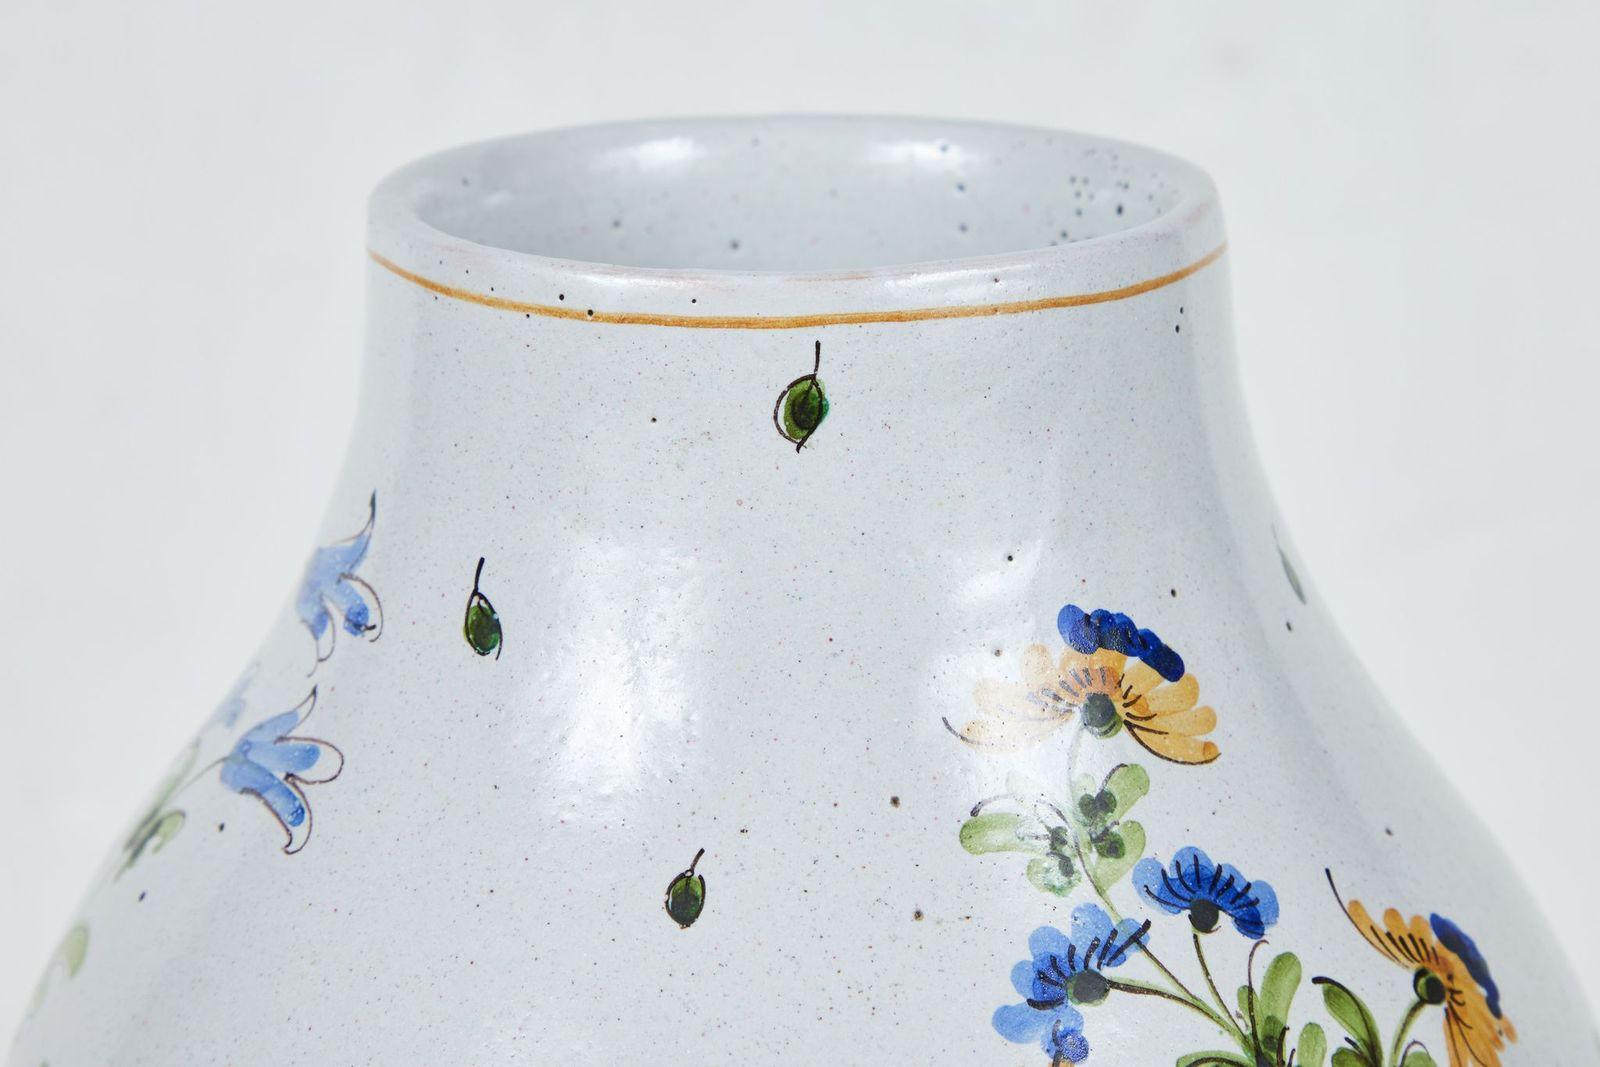 A rare, period, hand-painted and glazed, Sicilian ceramic urn in the double gourd style. Featuring wonderful vignettes of figures, birds and butterflies amidst orange trees and flowers.